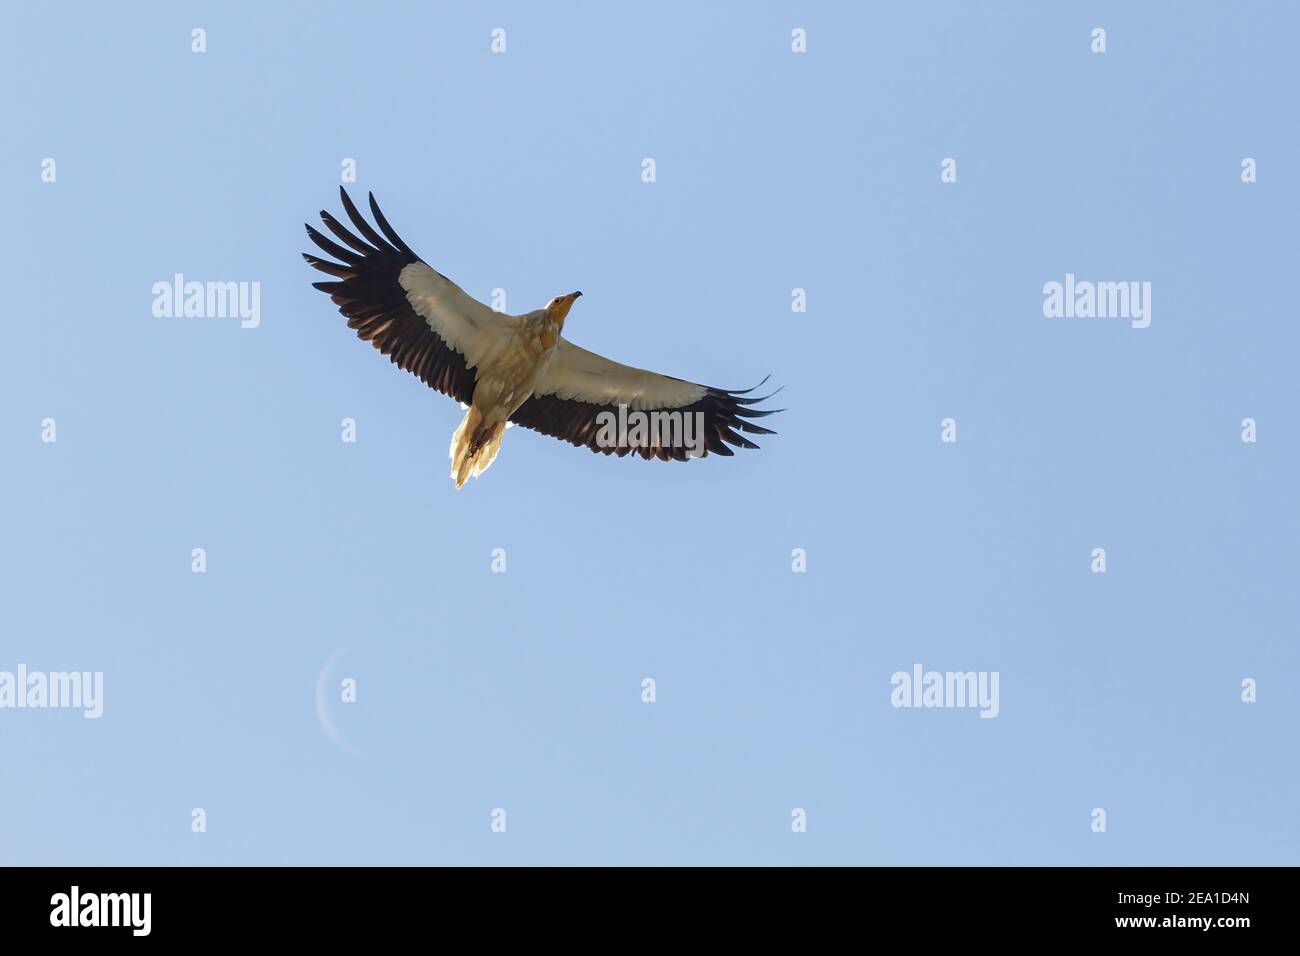 Egyptian vulture, Neophron percnopterus, adult soaring in flight against a blue sky, Spain, Europe Stock Photo